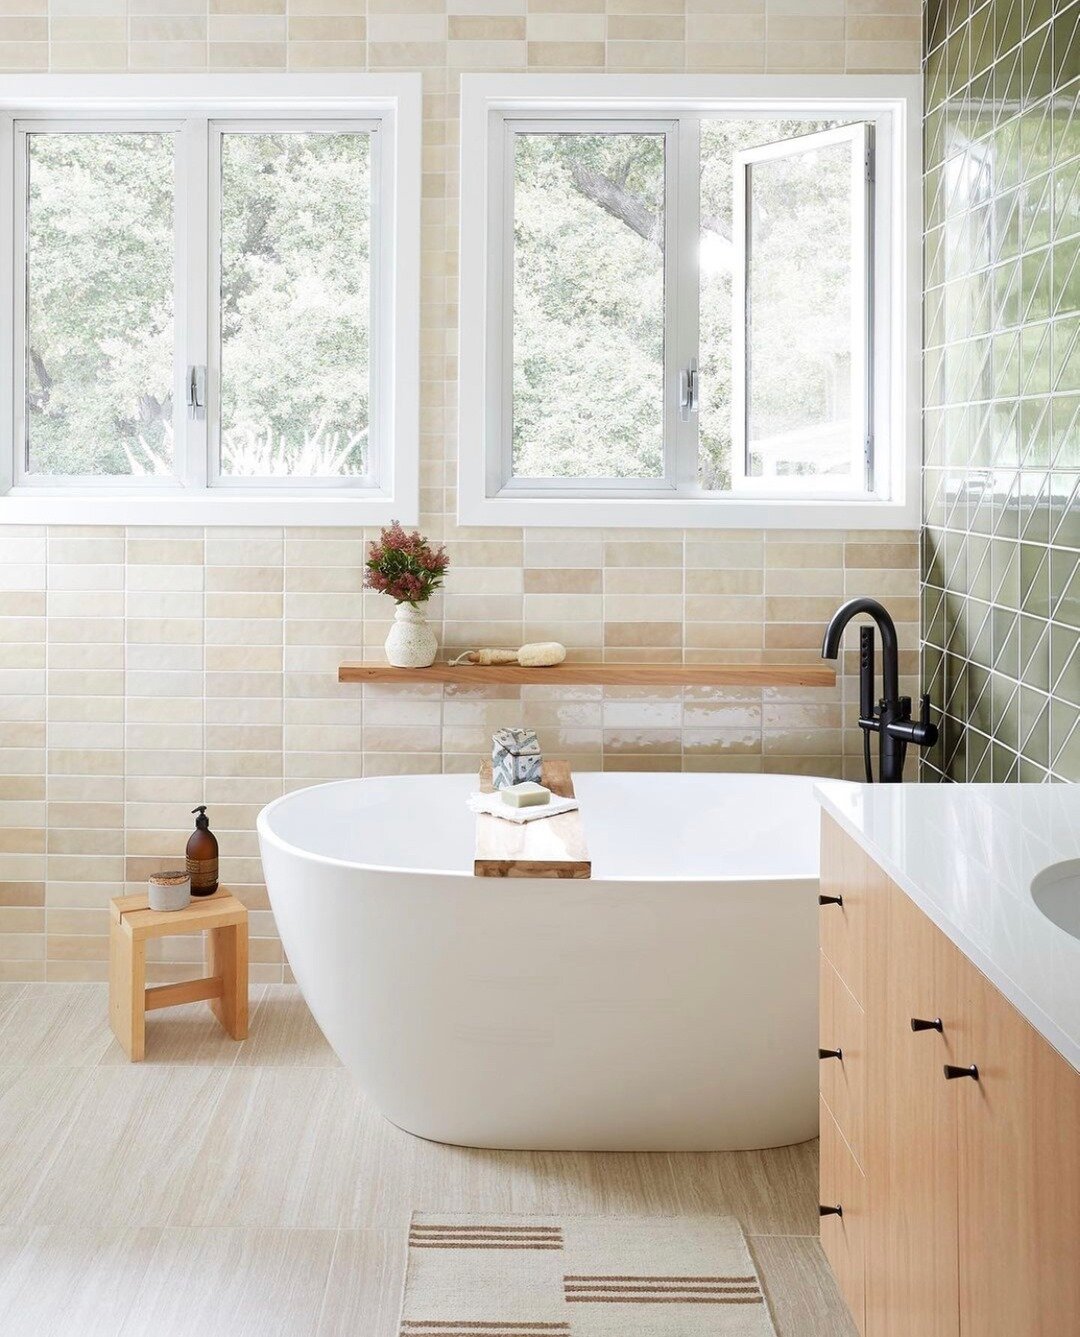 Some major tile inspiration for this Wednesday morning + you know I&rsquo;m a sucker for a splash of green 💚⠀⠀⠀⠀⠀⠀⠀⠀⠀
⠀⠀⠀⠀⠀⠀⠀⠀⠀
Design: @ginny_macdonald⠀⠀⠀⠀⠀⠀⠀⠀⠀
Photo: @jessicajalexander